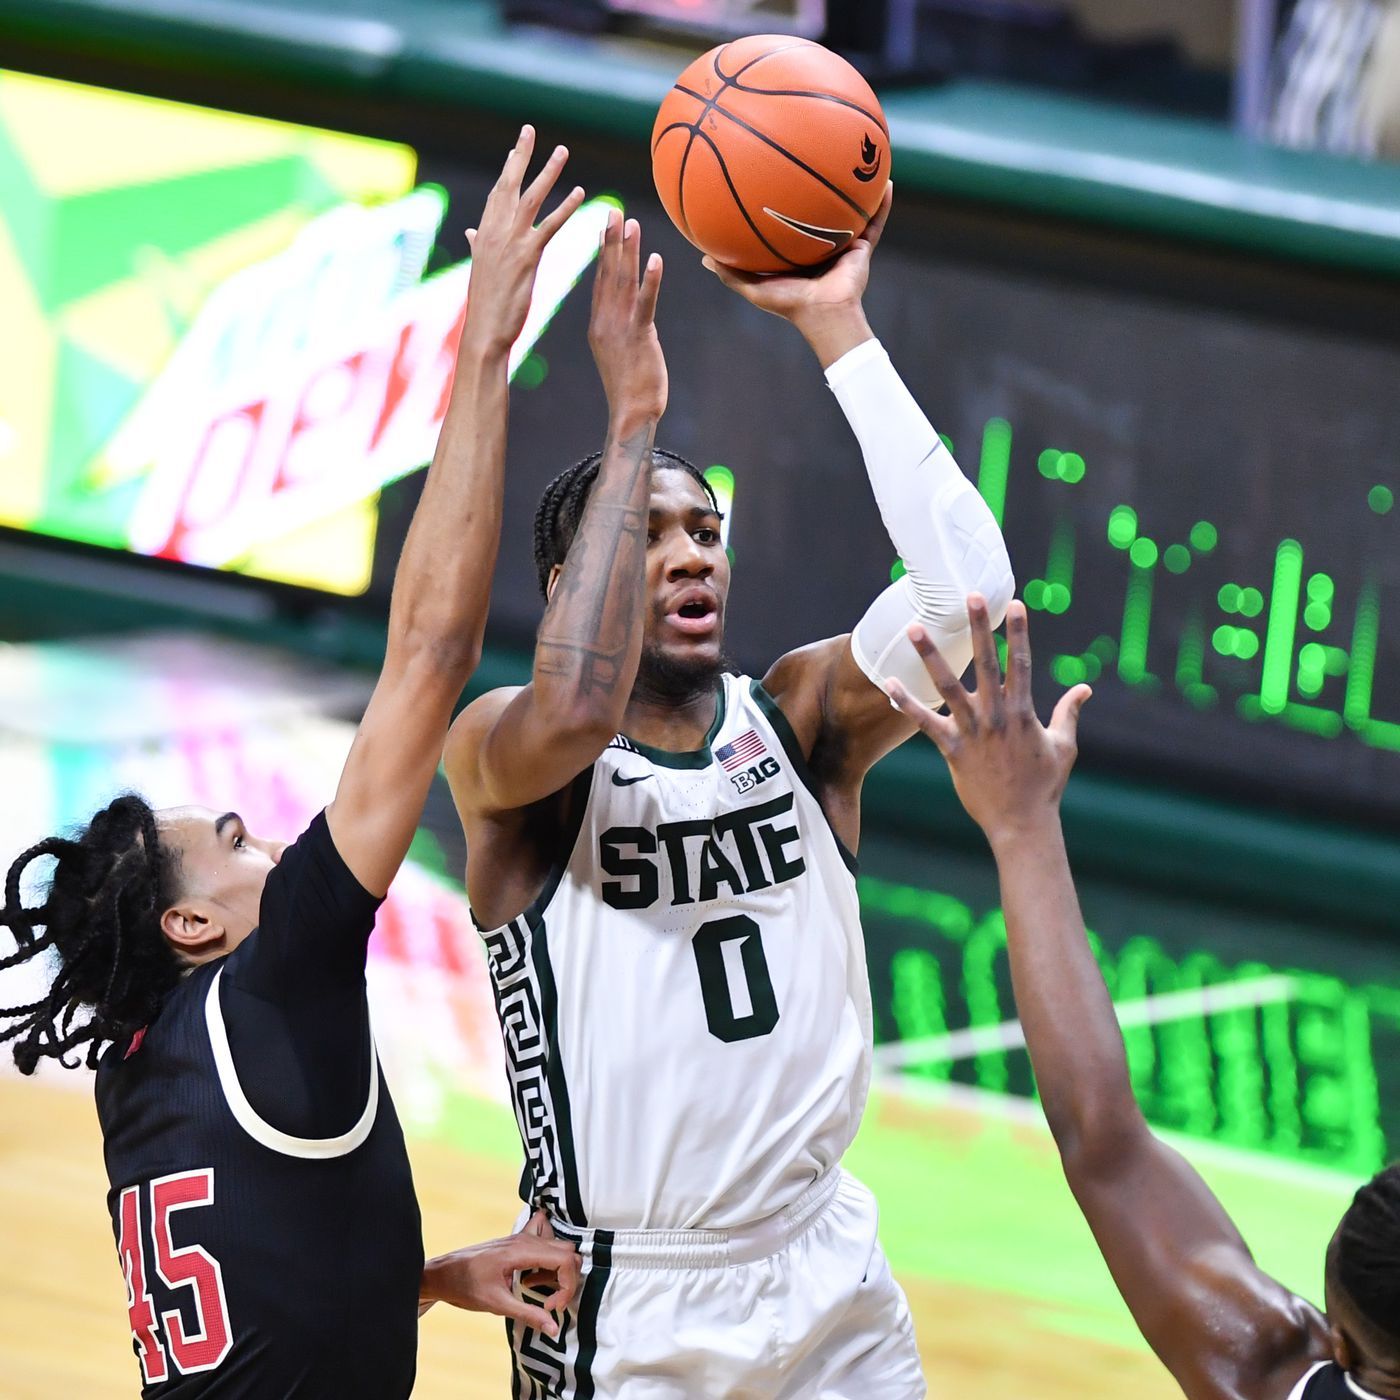 Msu 2022 Basketball Schedule Michigan State Men's Basketball: 2021-'22 Tv Schedule Released - The Only  Colors